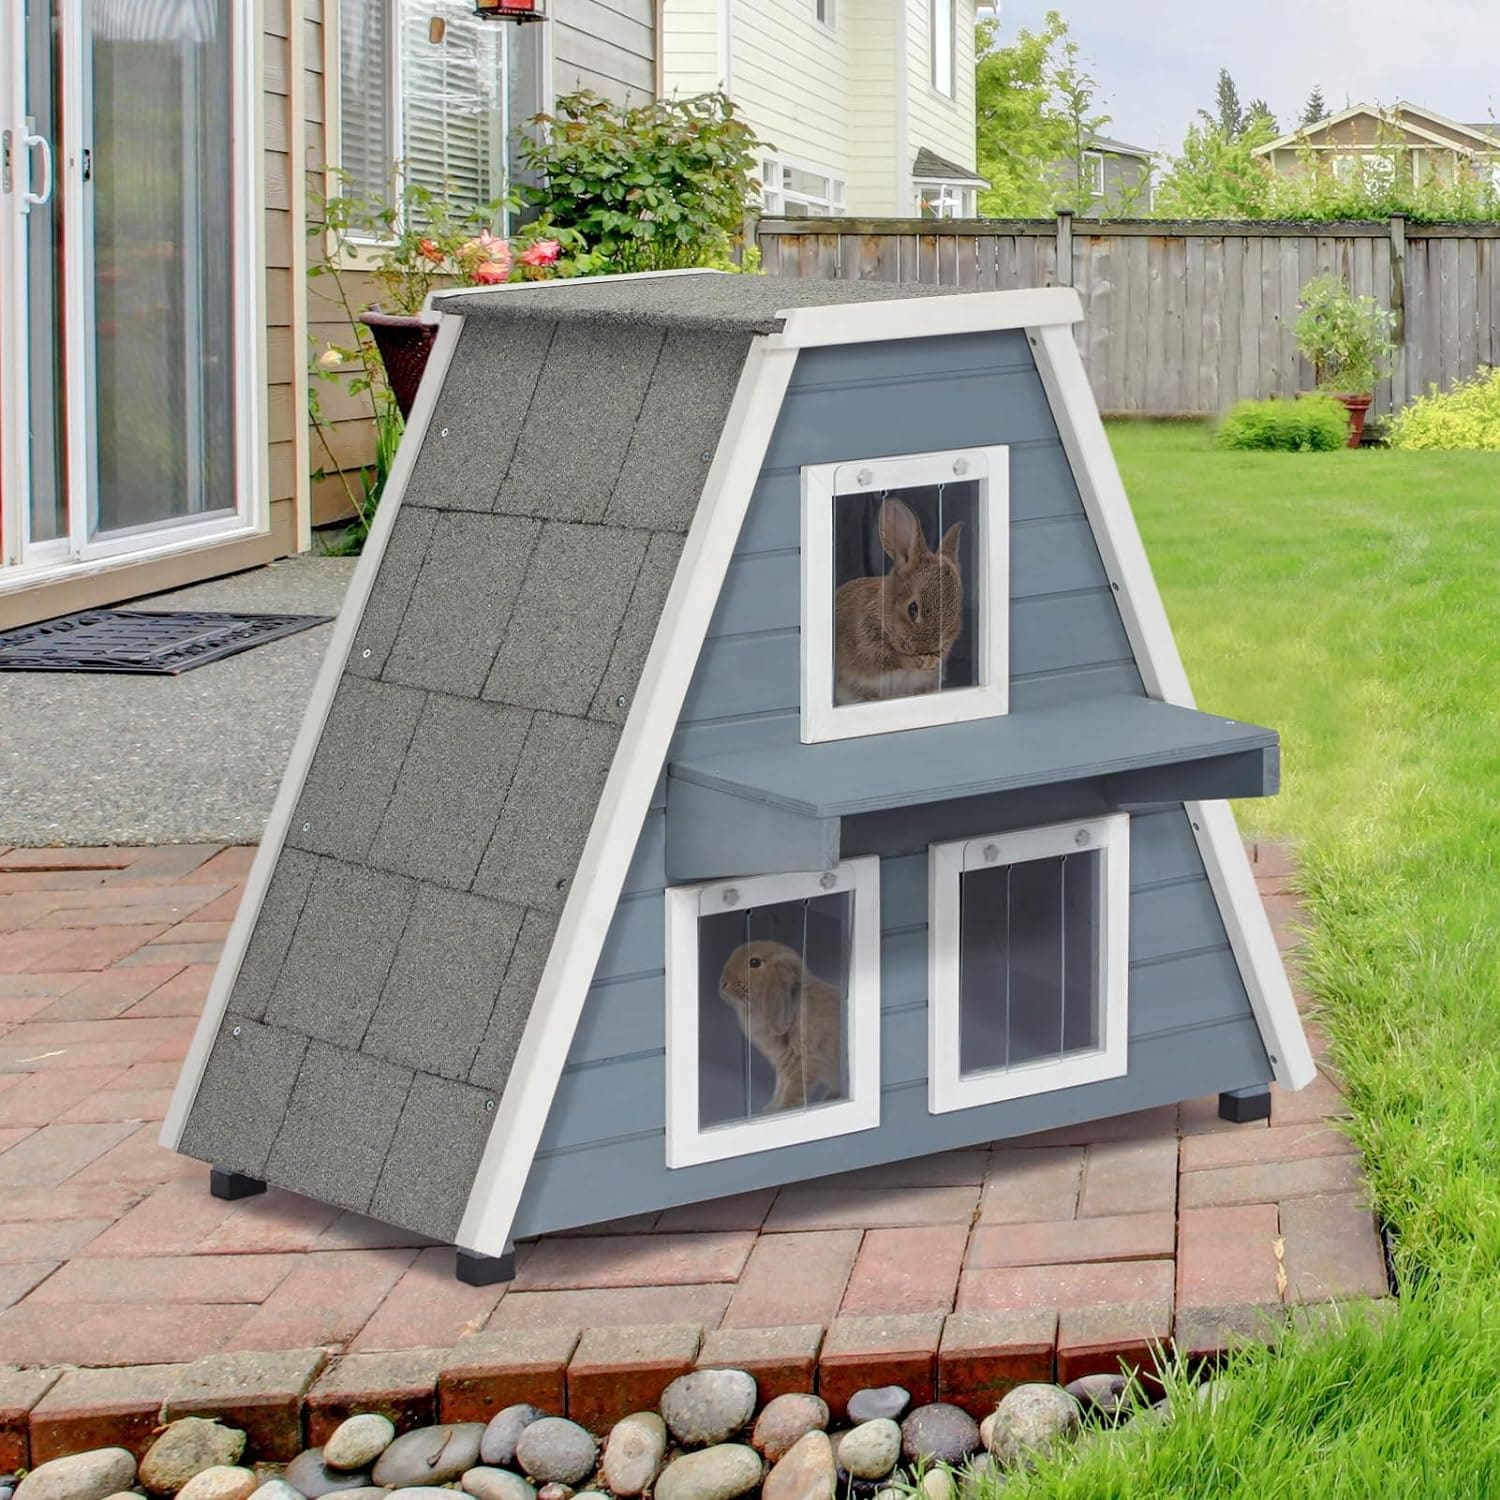 Petsfit Outdoor Cat House Weatherproof, Outside Feral Cat House with Escape Door,Outdoor Indoor Pet House for Small Animal Grey